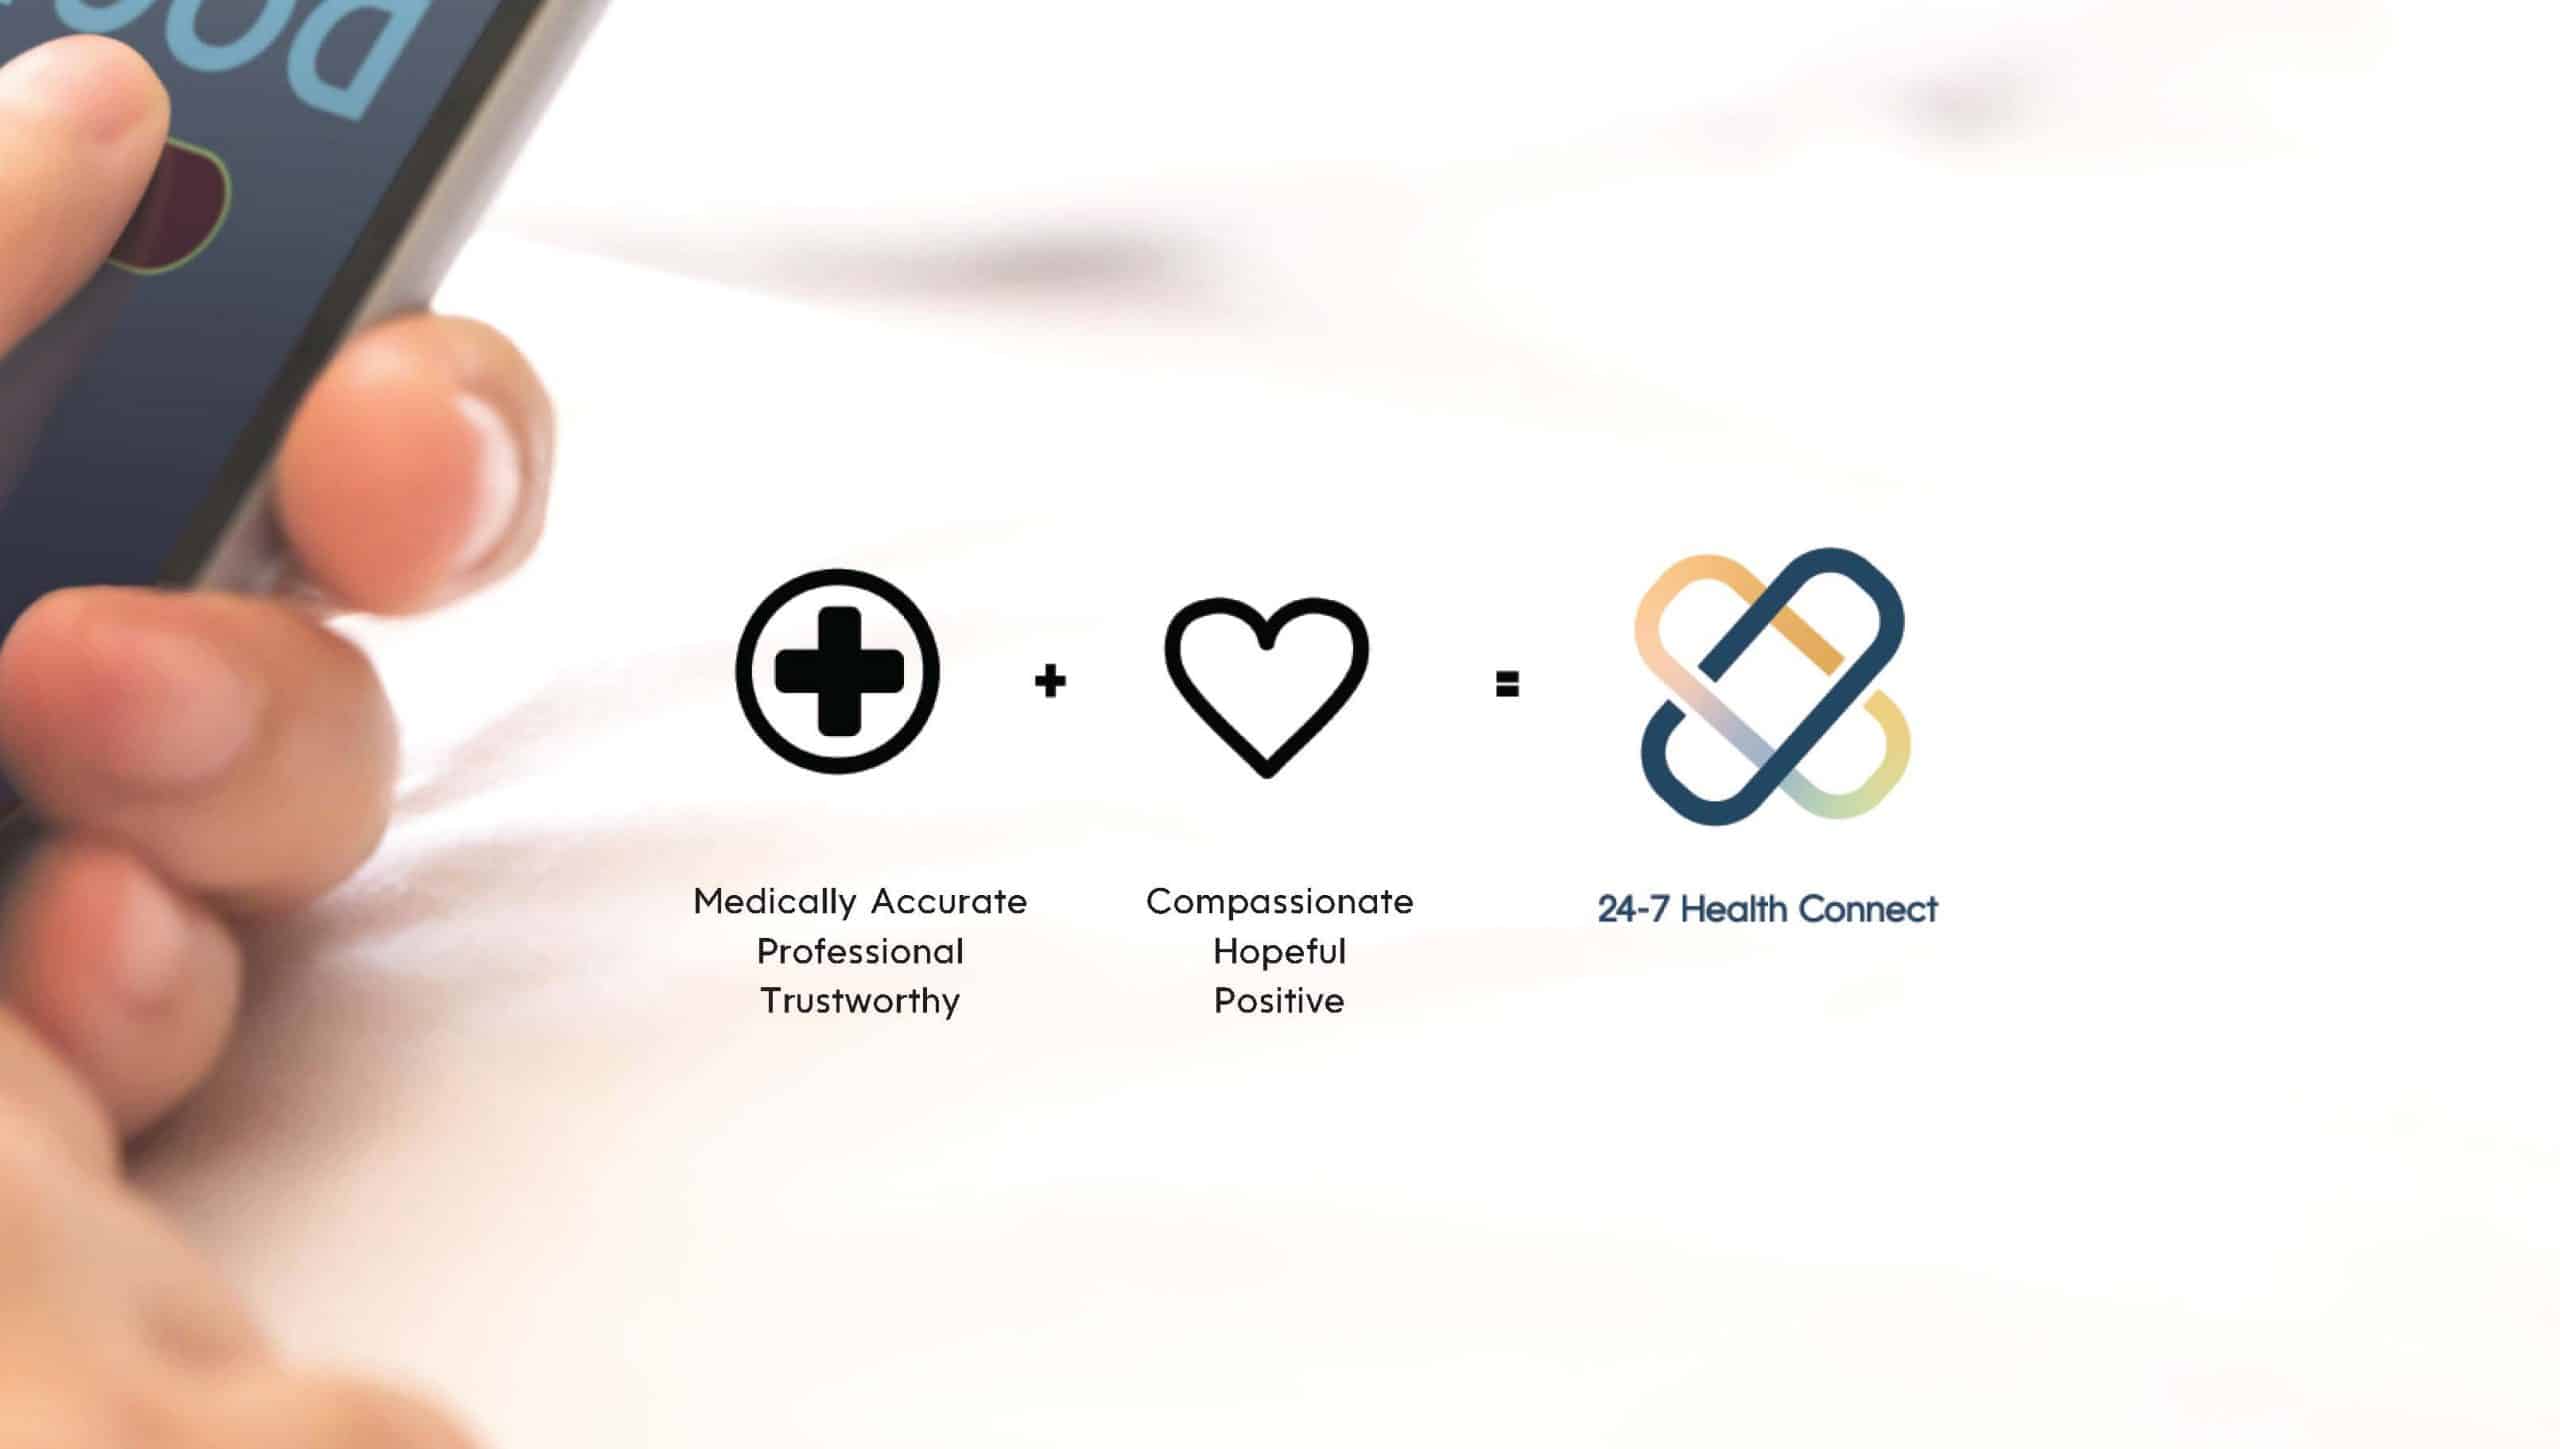 Logo ideas and inspiration for 24-7 health connect app